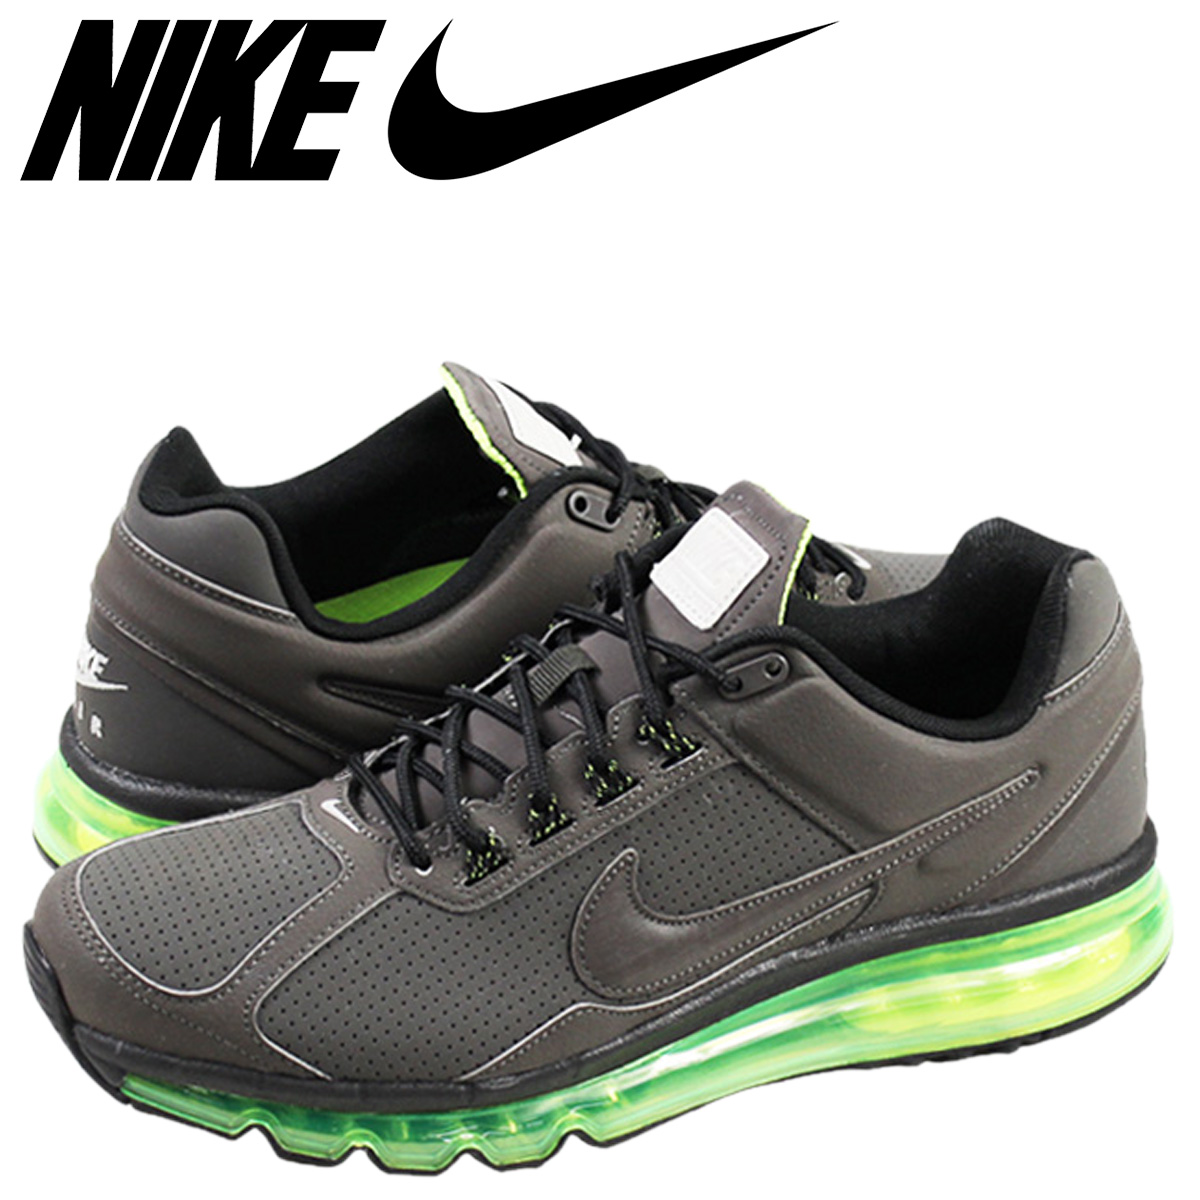 ALLSPORTS: Nike NIKE Air Max sneakers AIR MAX 2013 LEATHER 599,455 